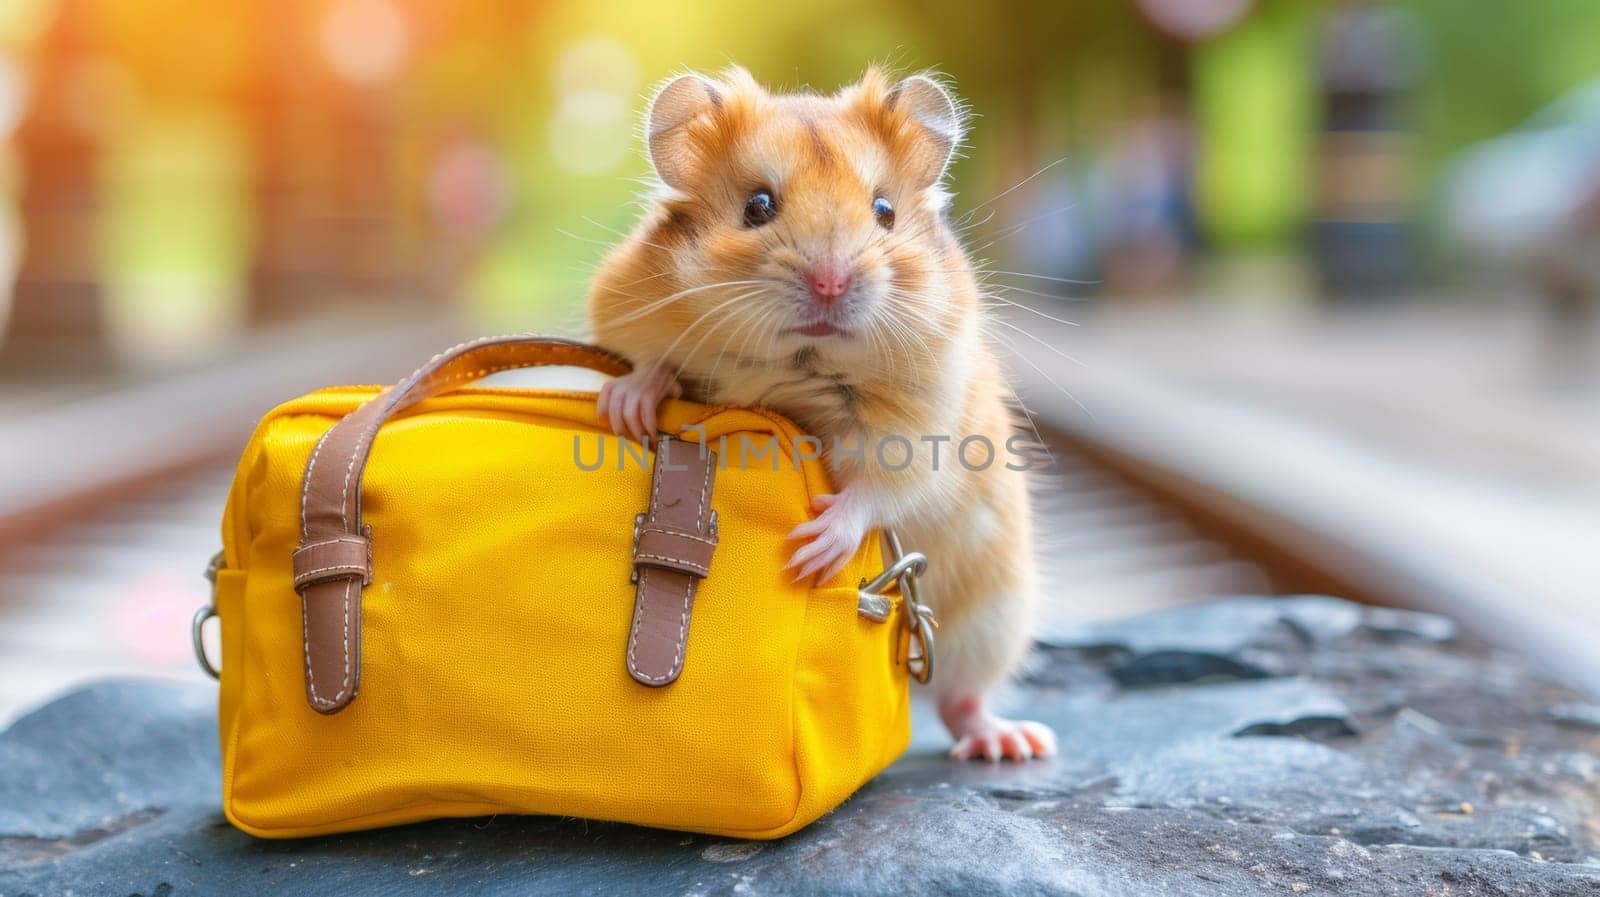 A hamster with yellow bag on a rock near train tracks